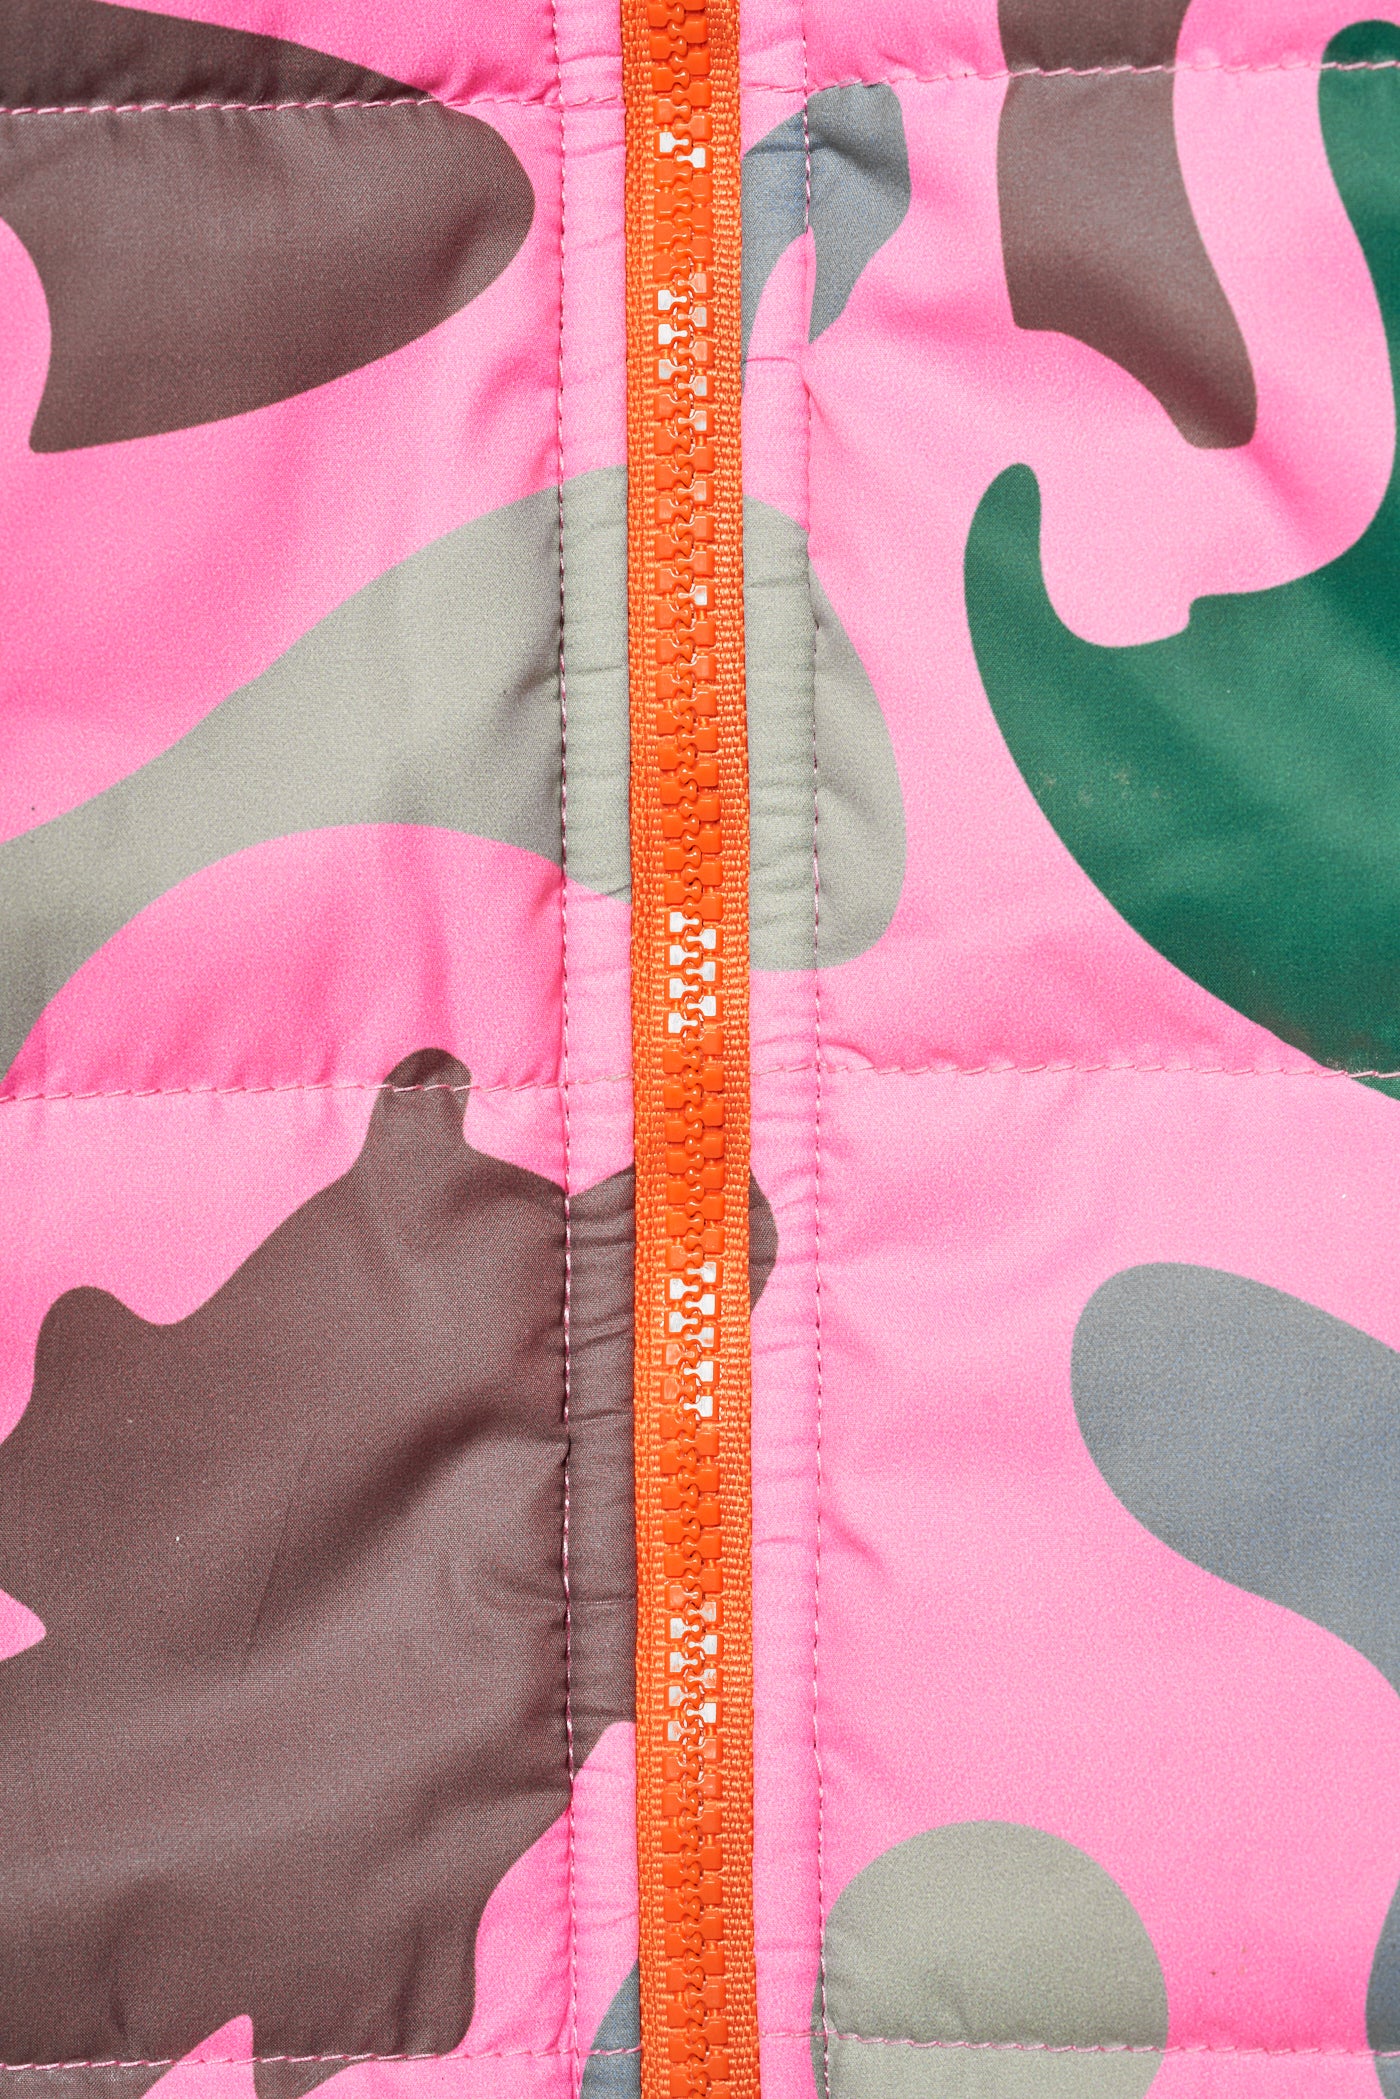 MILITARY CAMO PUFFER JACKET - PINK